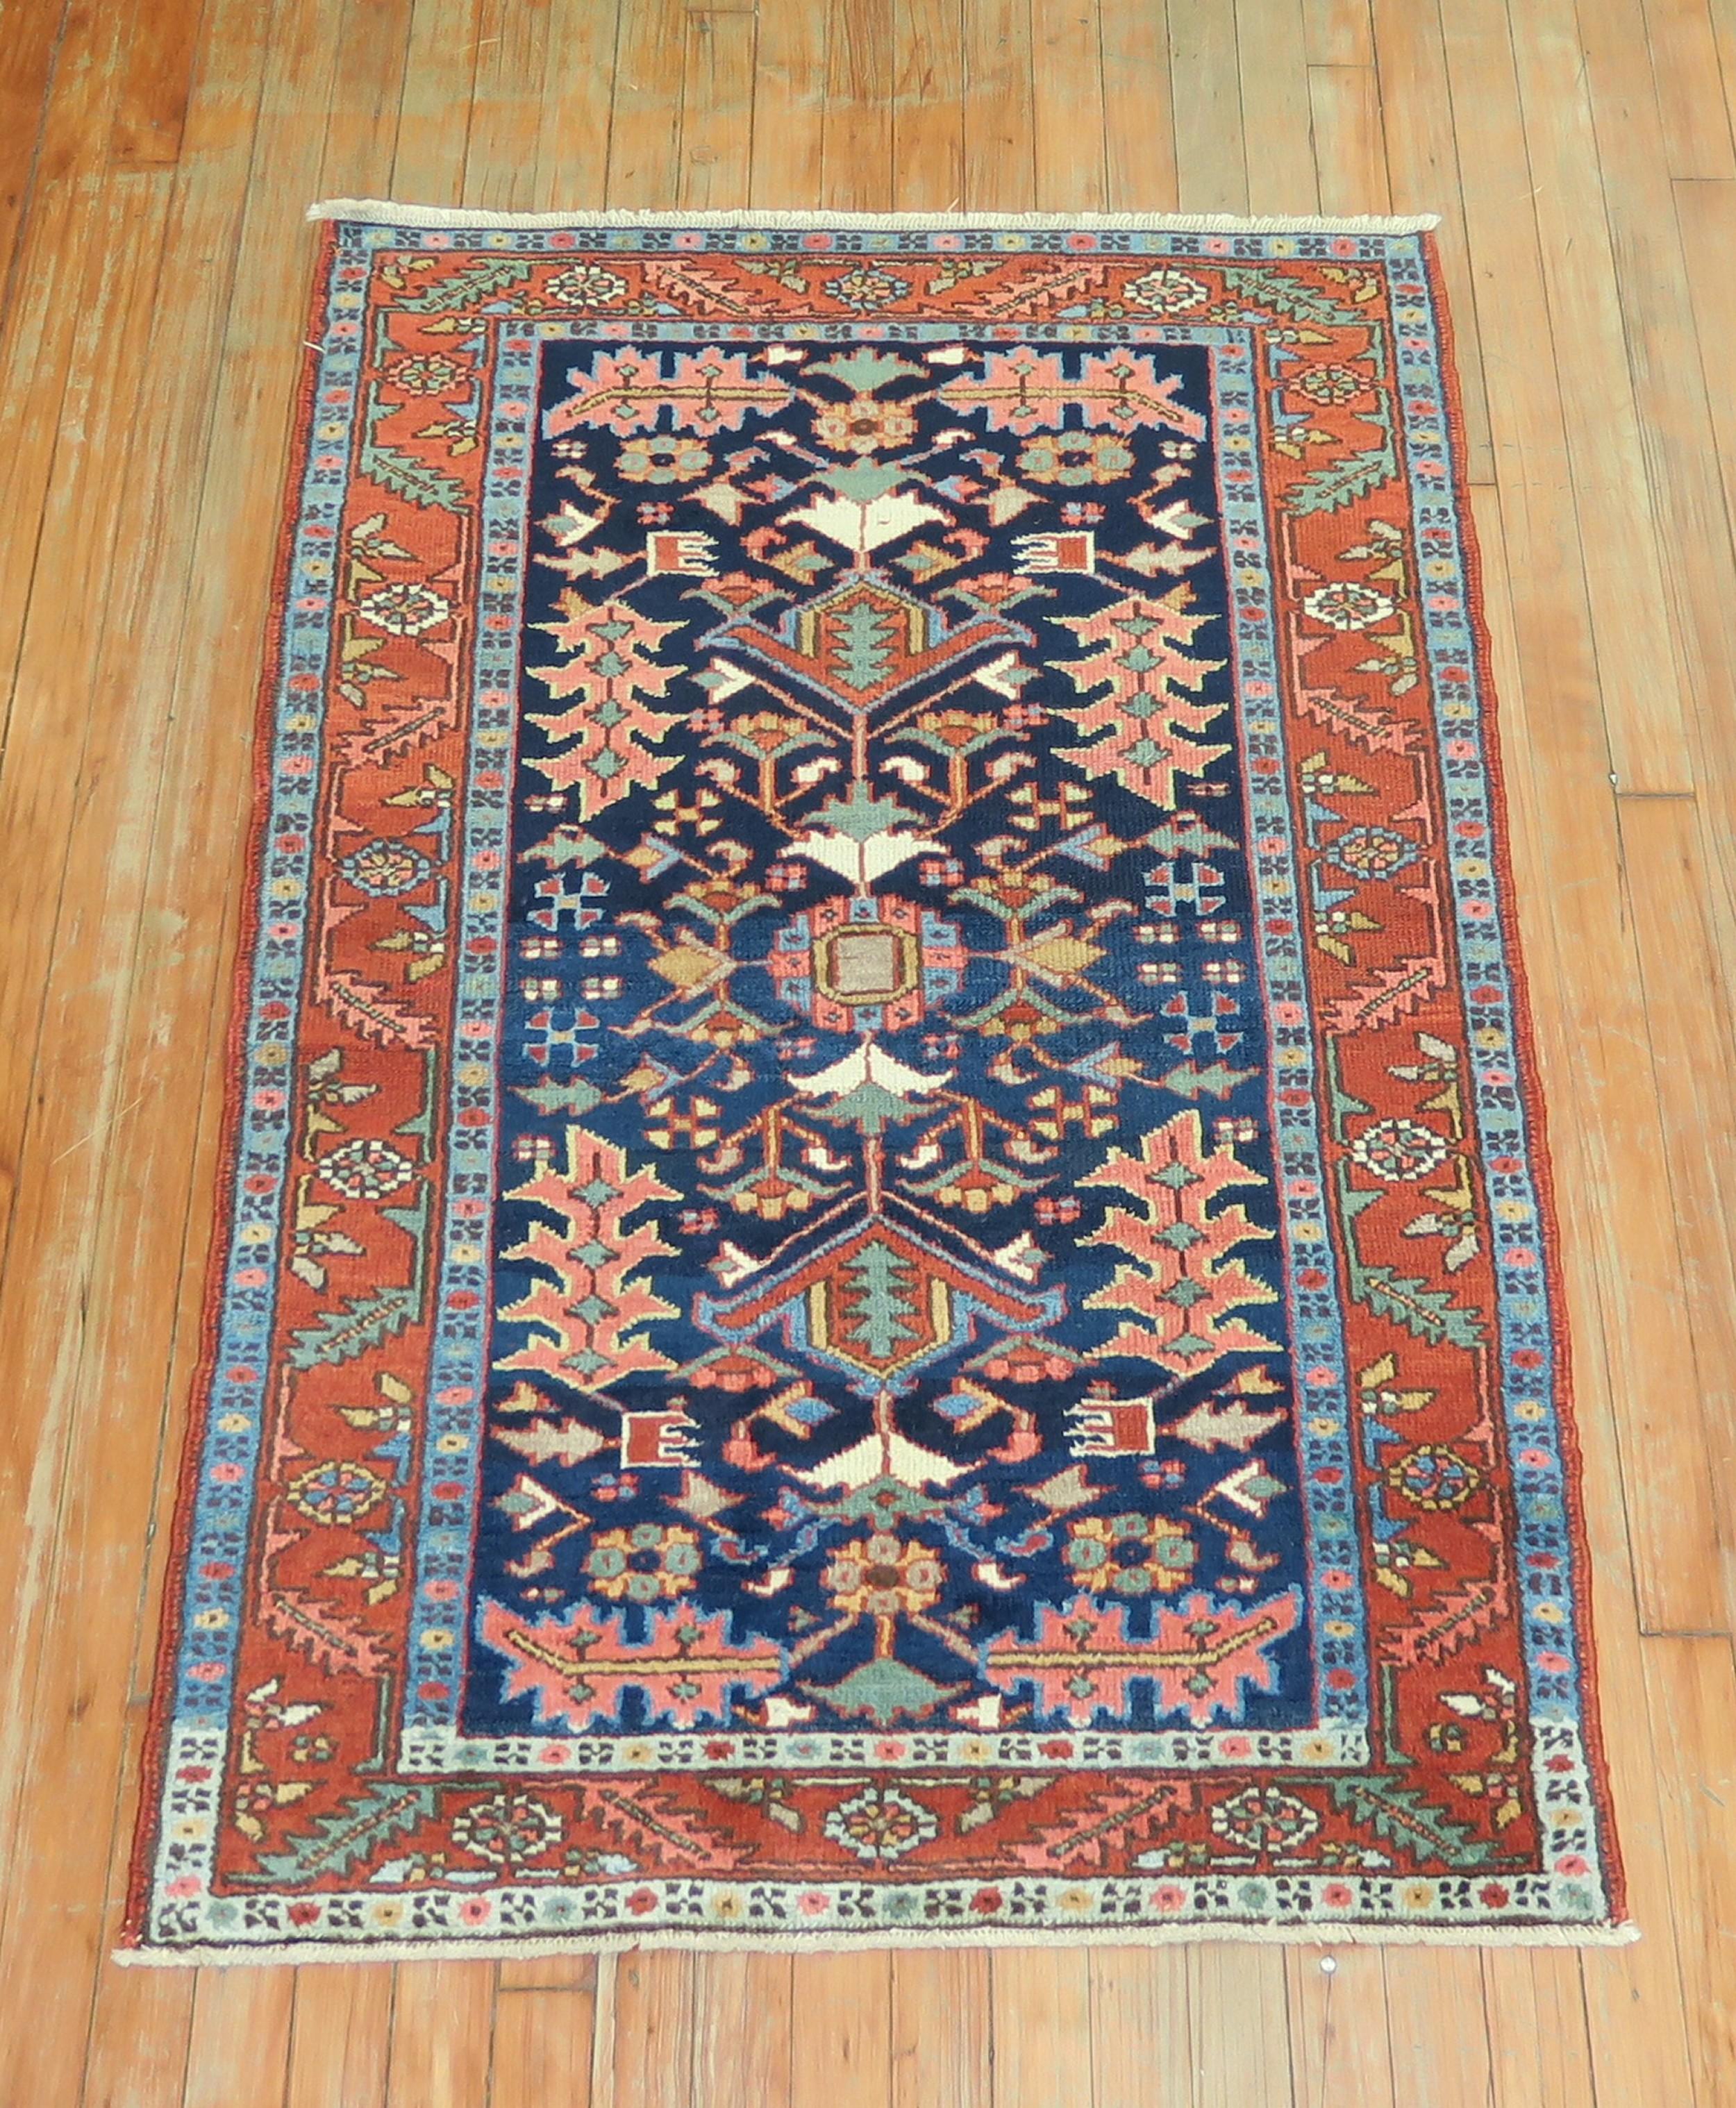 Antique Persian Heriz rug with a geometric motif on a vibrant navy blue ground. Great condition & quality. If you appreciate oriental Persian rugs then this is one you will always enjoy.

Measures: 2'11” x 4'6”.